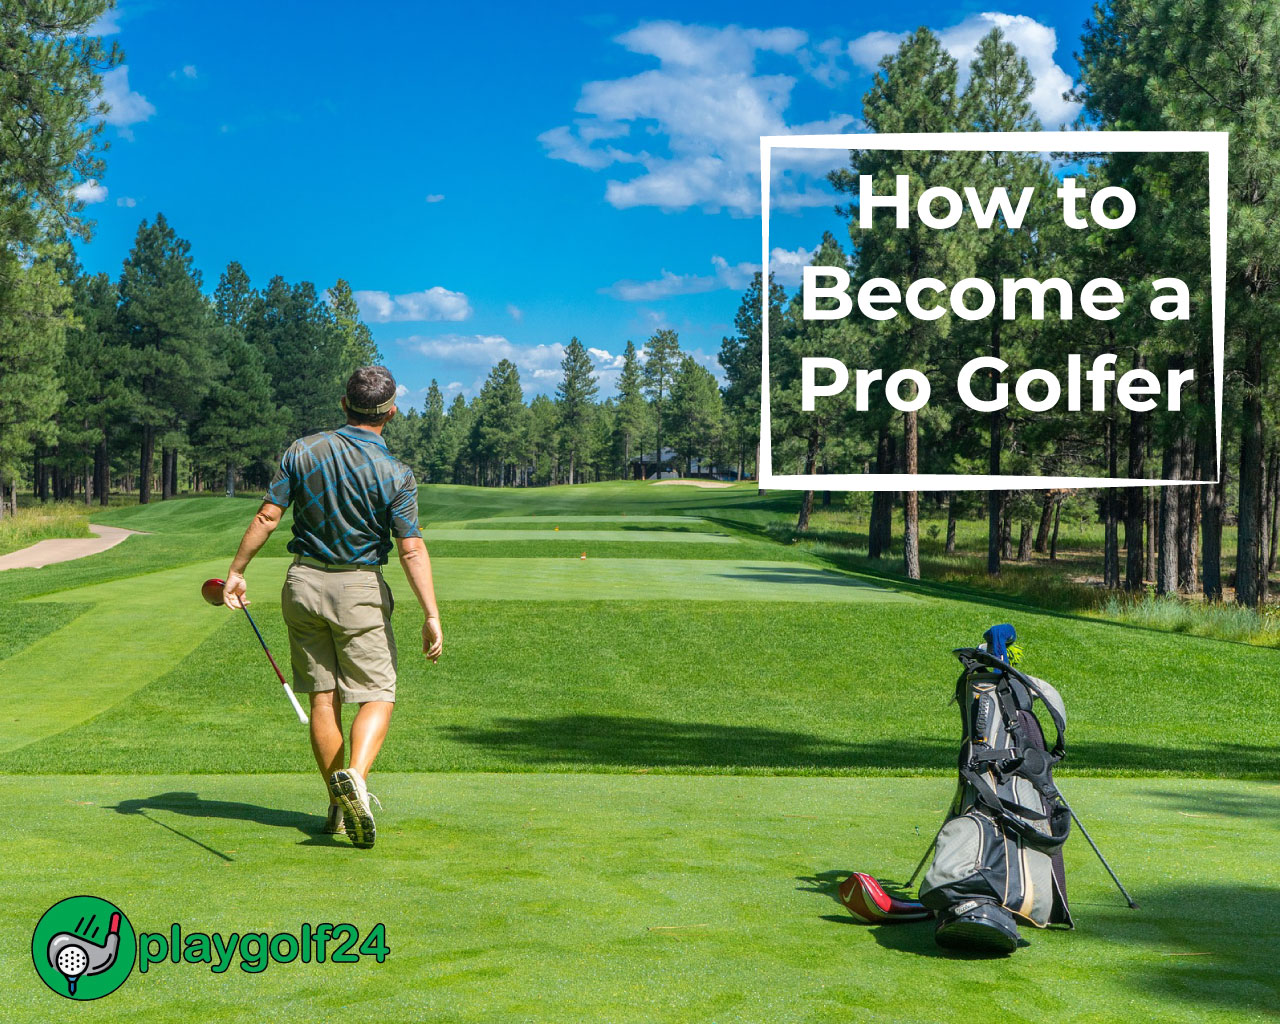 How to Become a Pro Golfer